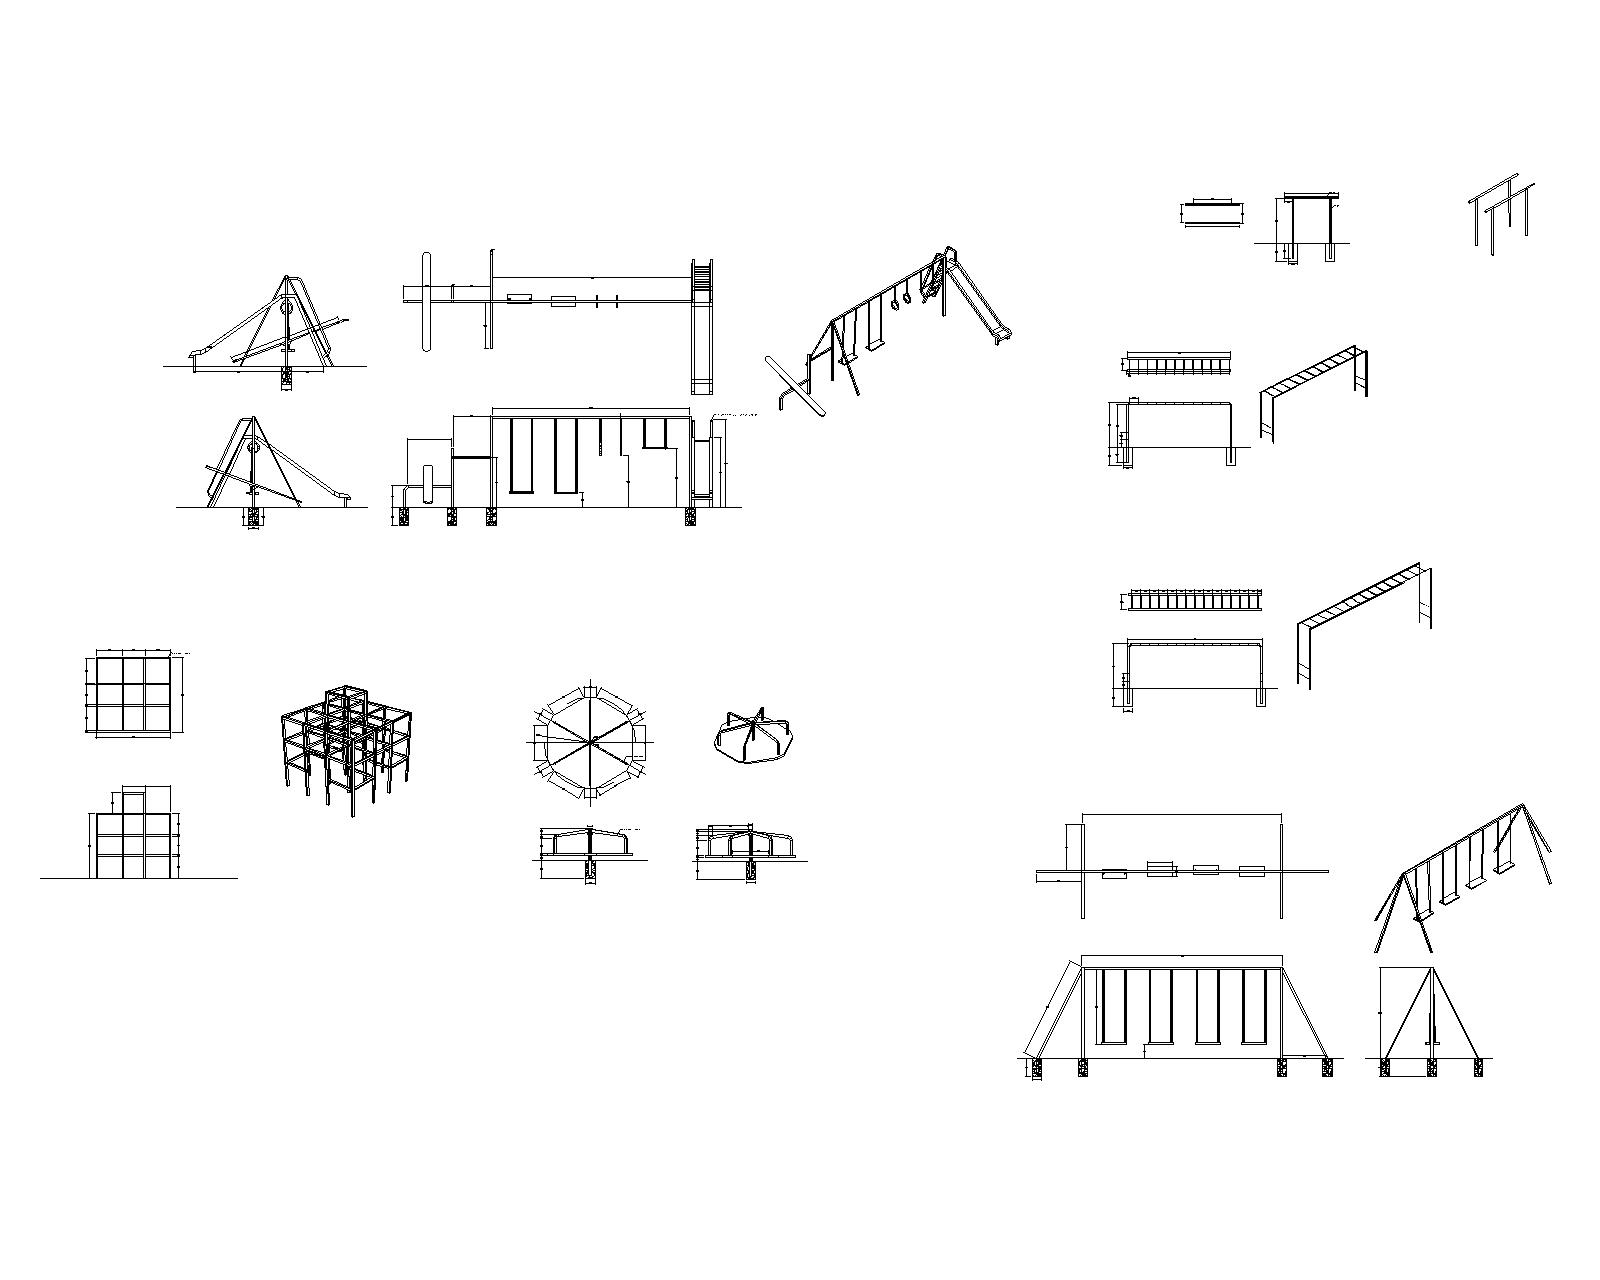 Playgrounds Equipment Cad Files Dwg Files Plans And Details